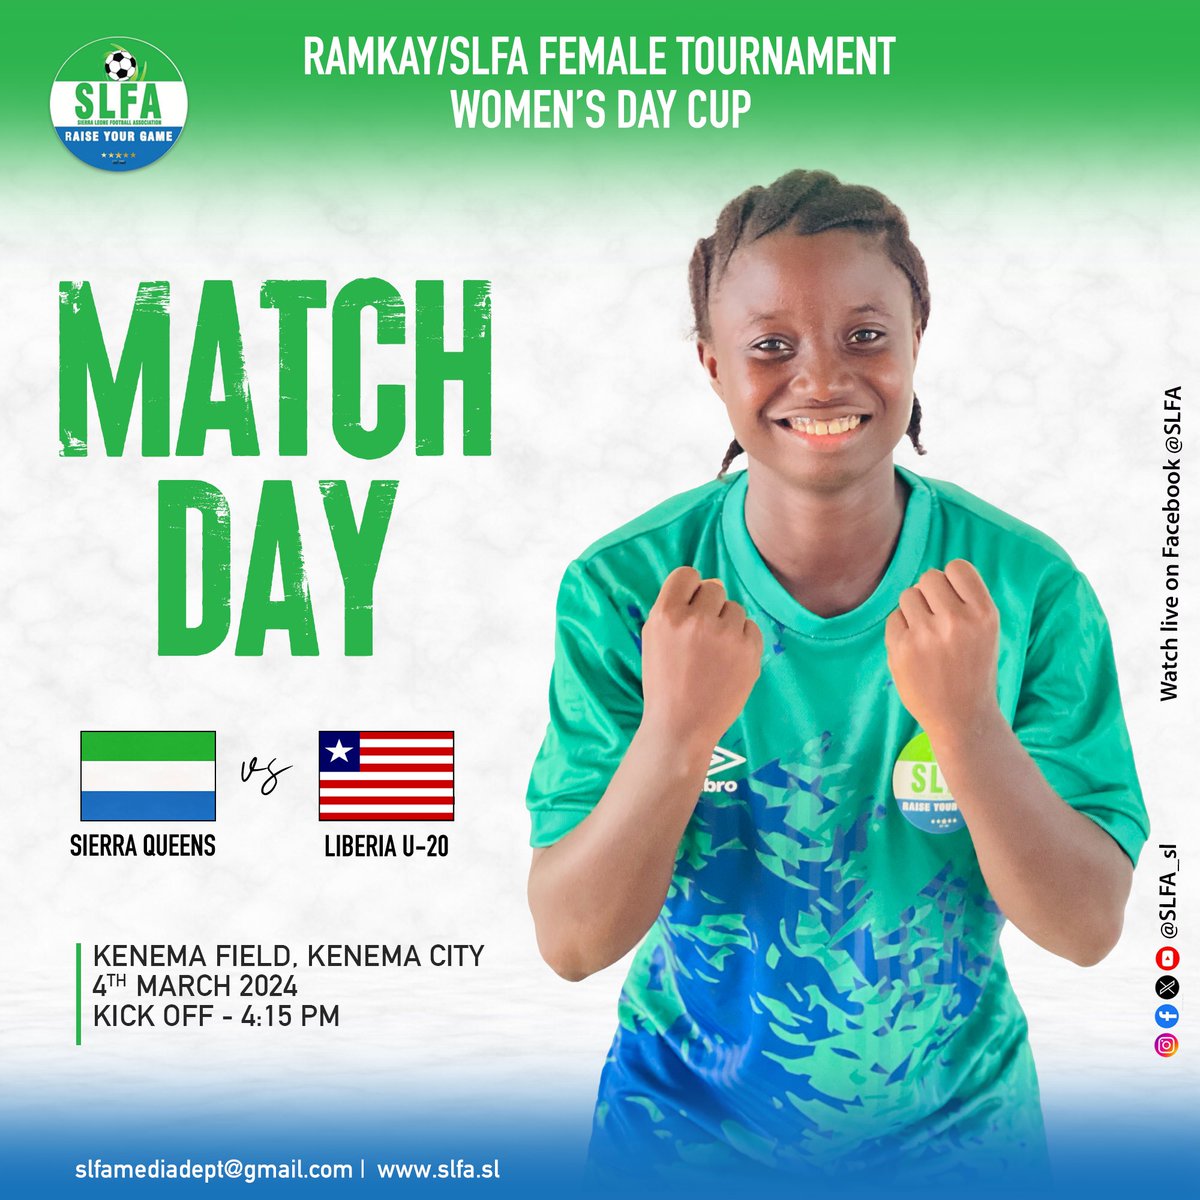 Sierra Queens are ready to take on Liberia in their 2nd match of the Women’s Day Cup in Kenema later today. After a thrilling victory in their first match, the team is eager to showcase their skills once again. Let's cheer them on to another victory! #SierraLeone #WomensDayCup